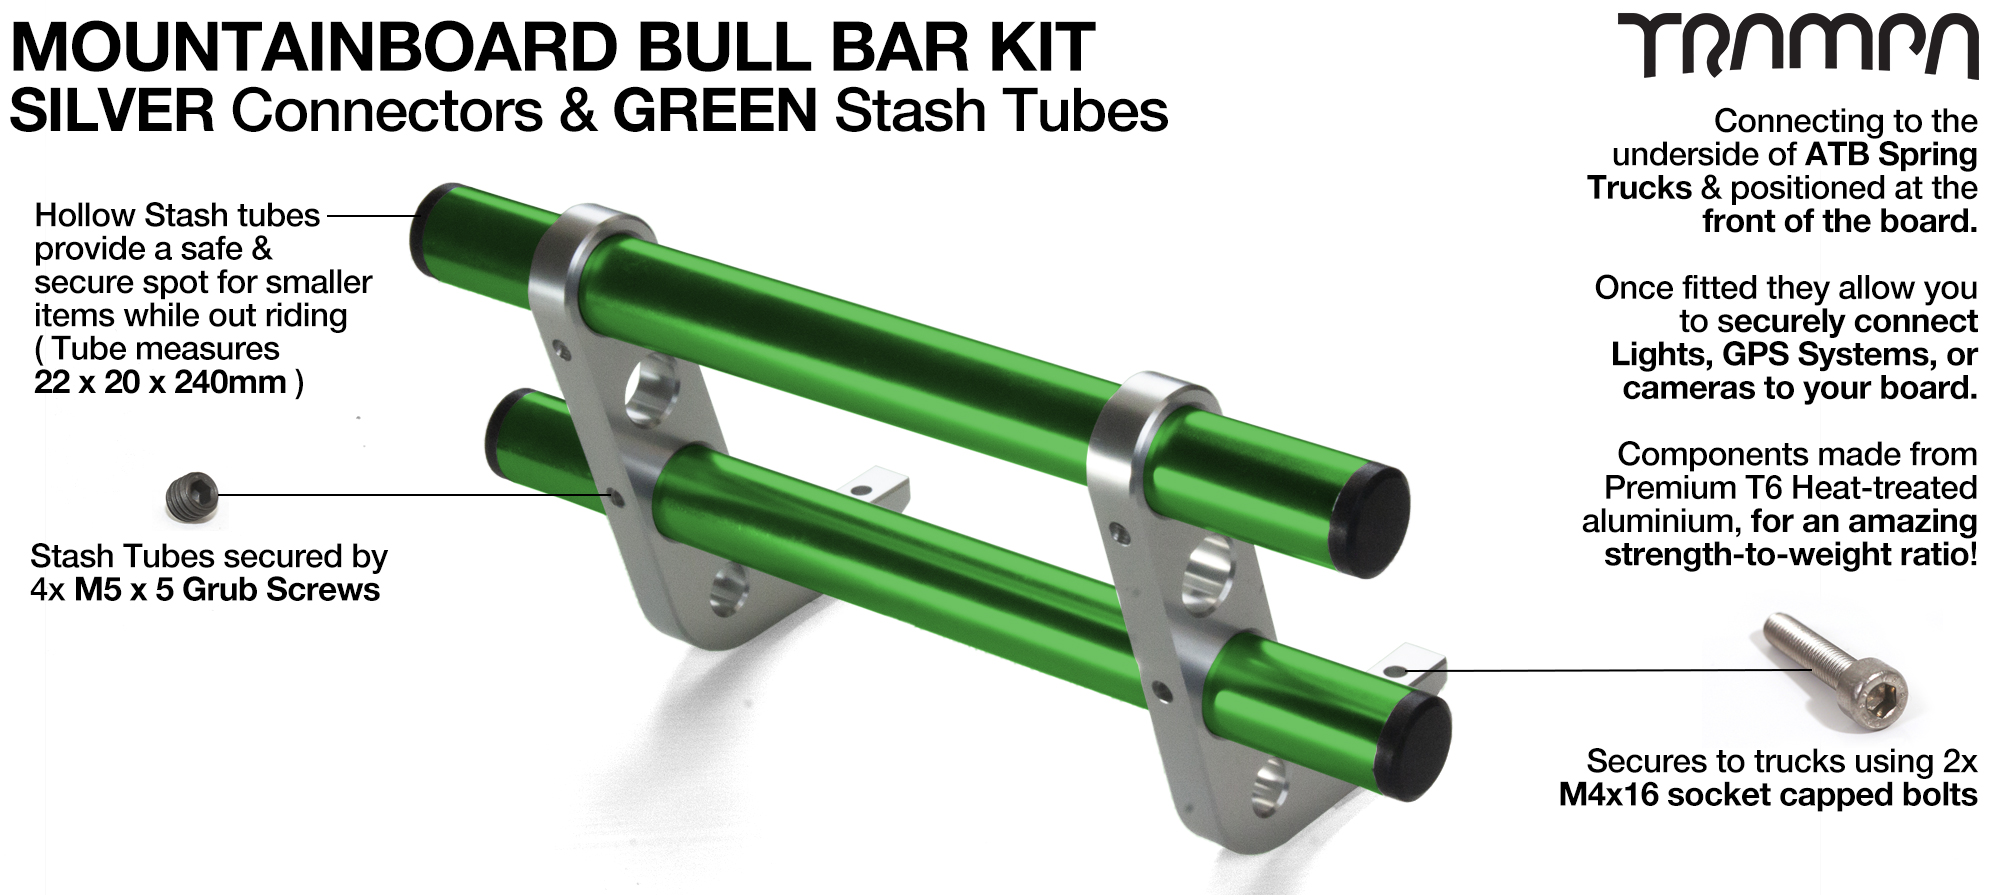 SILVER Uprights & GREEN Crossbar BULL BARS for MOUNTAINBOARDS T6 Heat Treated CNC'd Aluminium Uprights, with Hollow Aluminium Stash Tubes with Rubber end bungs  